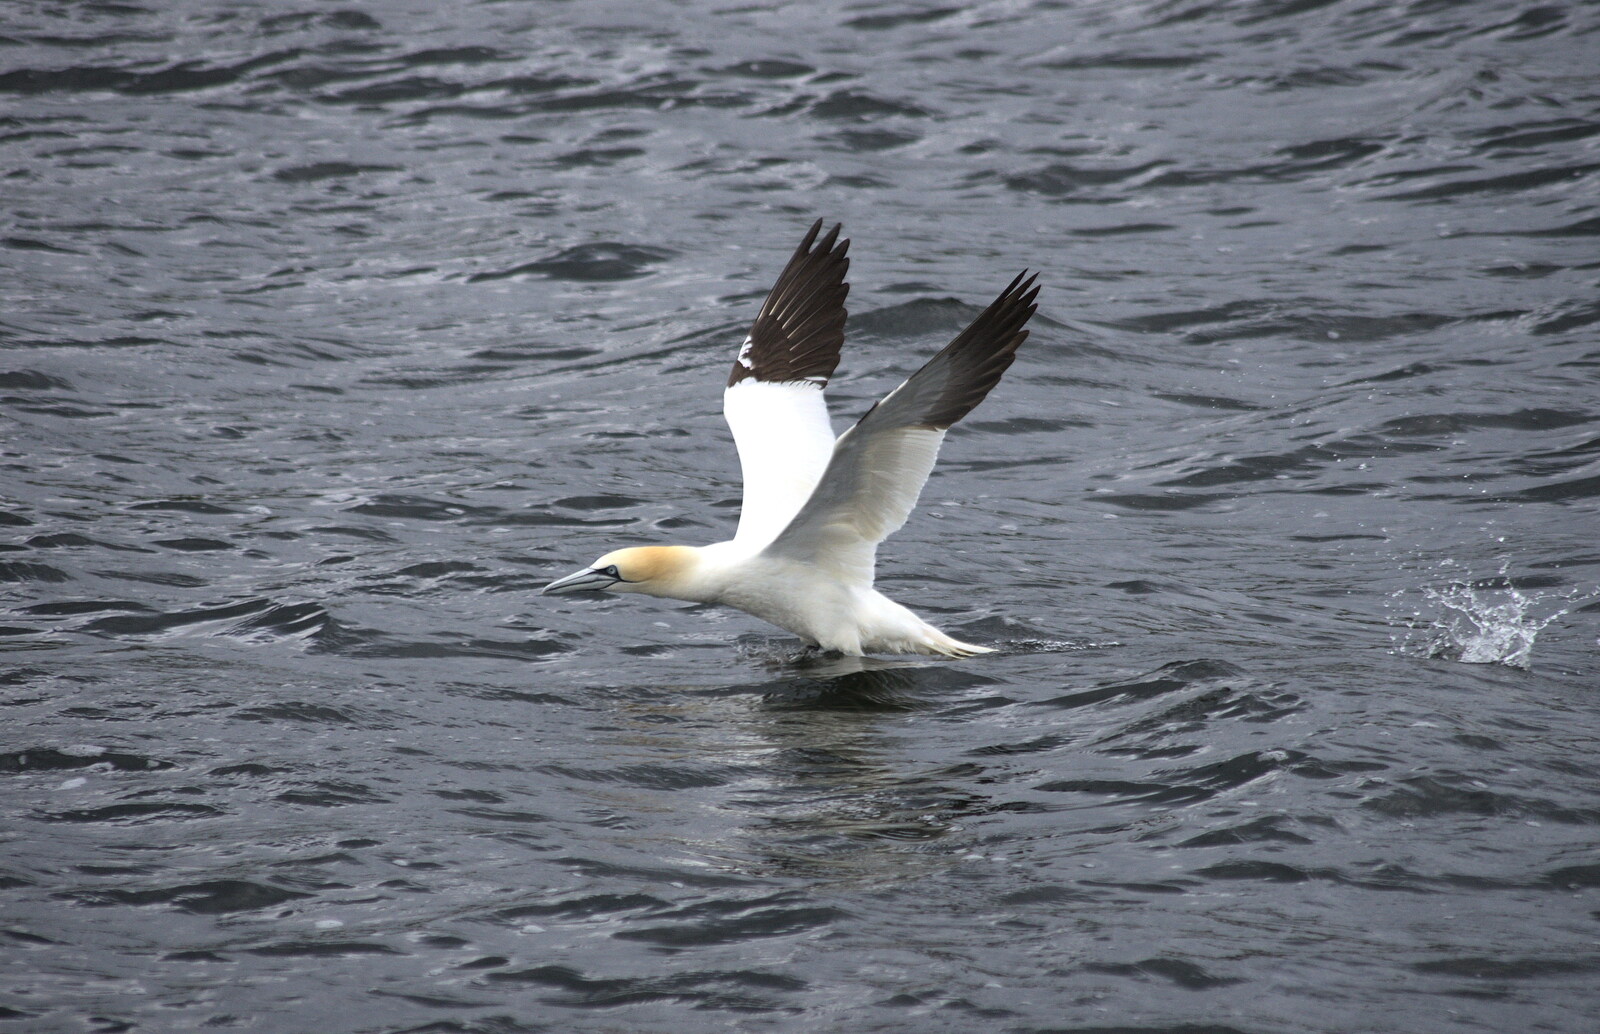 The gannet takes off from A Seafari Boat Trip, Kenmare, Kerry, Ireland - 3rd August 2017